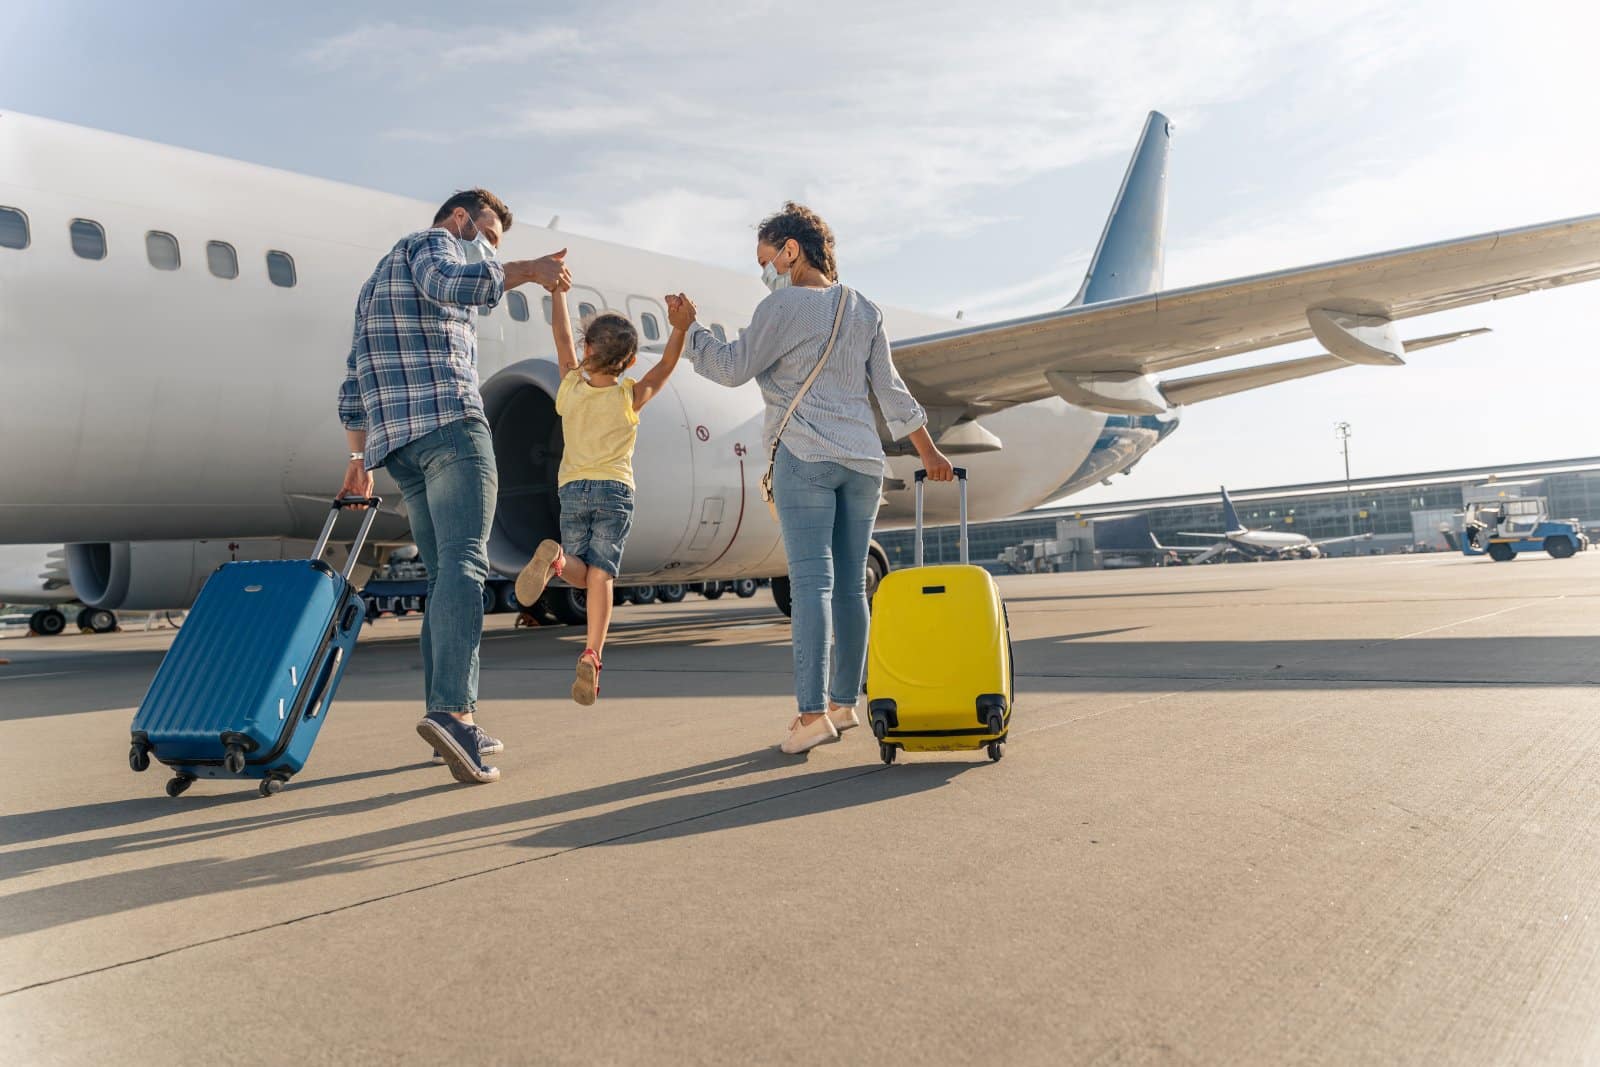 <p class="wp-caption-text">Image Credit: Shutterstock / Yaroslav Astakhov</p>  <p>Family travel is getting a much-needed makeover, moving beyond the nuclear model to embrace all kinds of families. Trans travelers lead by example, showing that family trips can be inclusive, enriching, and fun for everyone, regardless of how or with whom you define family.</p>